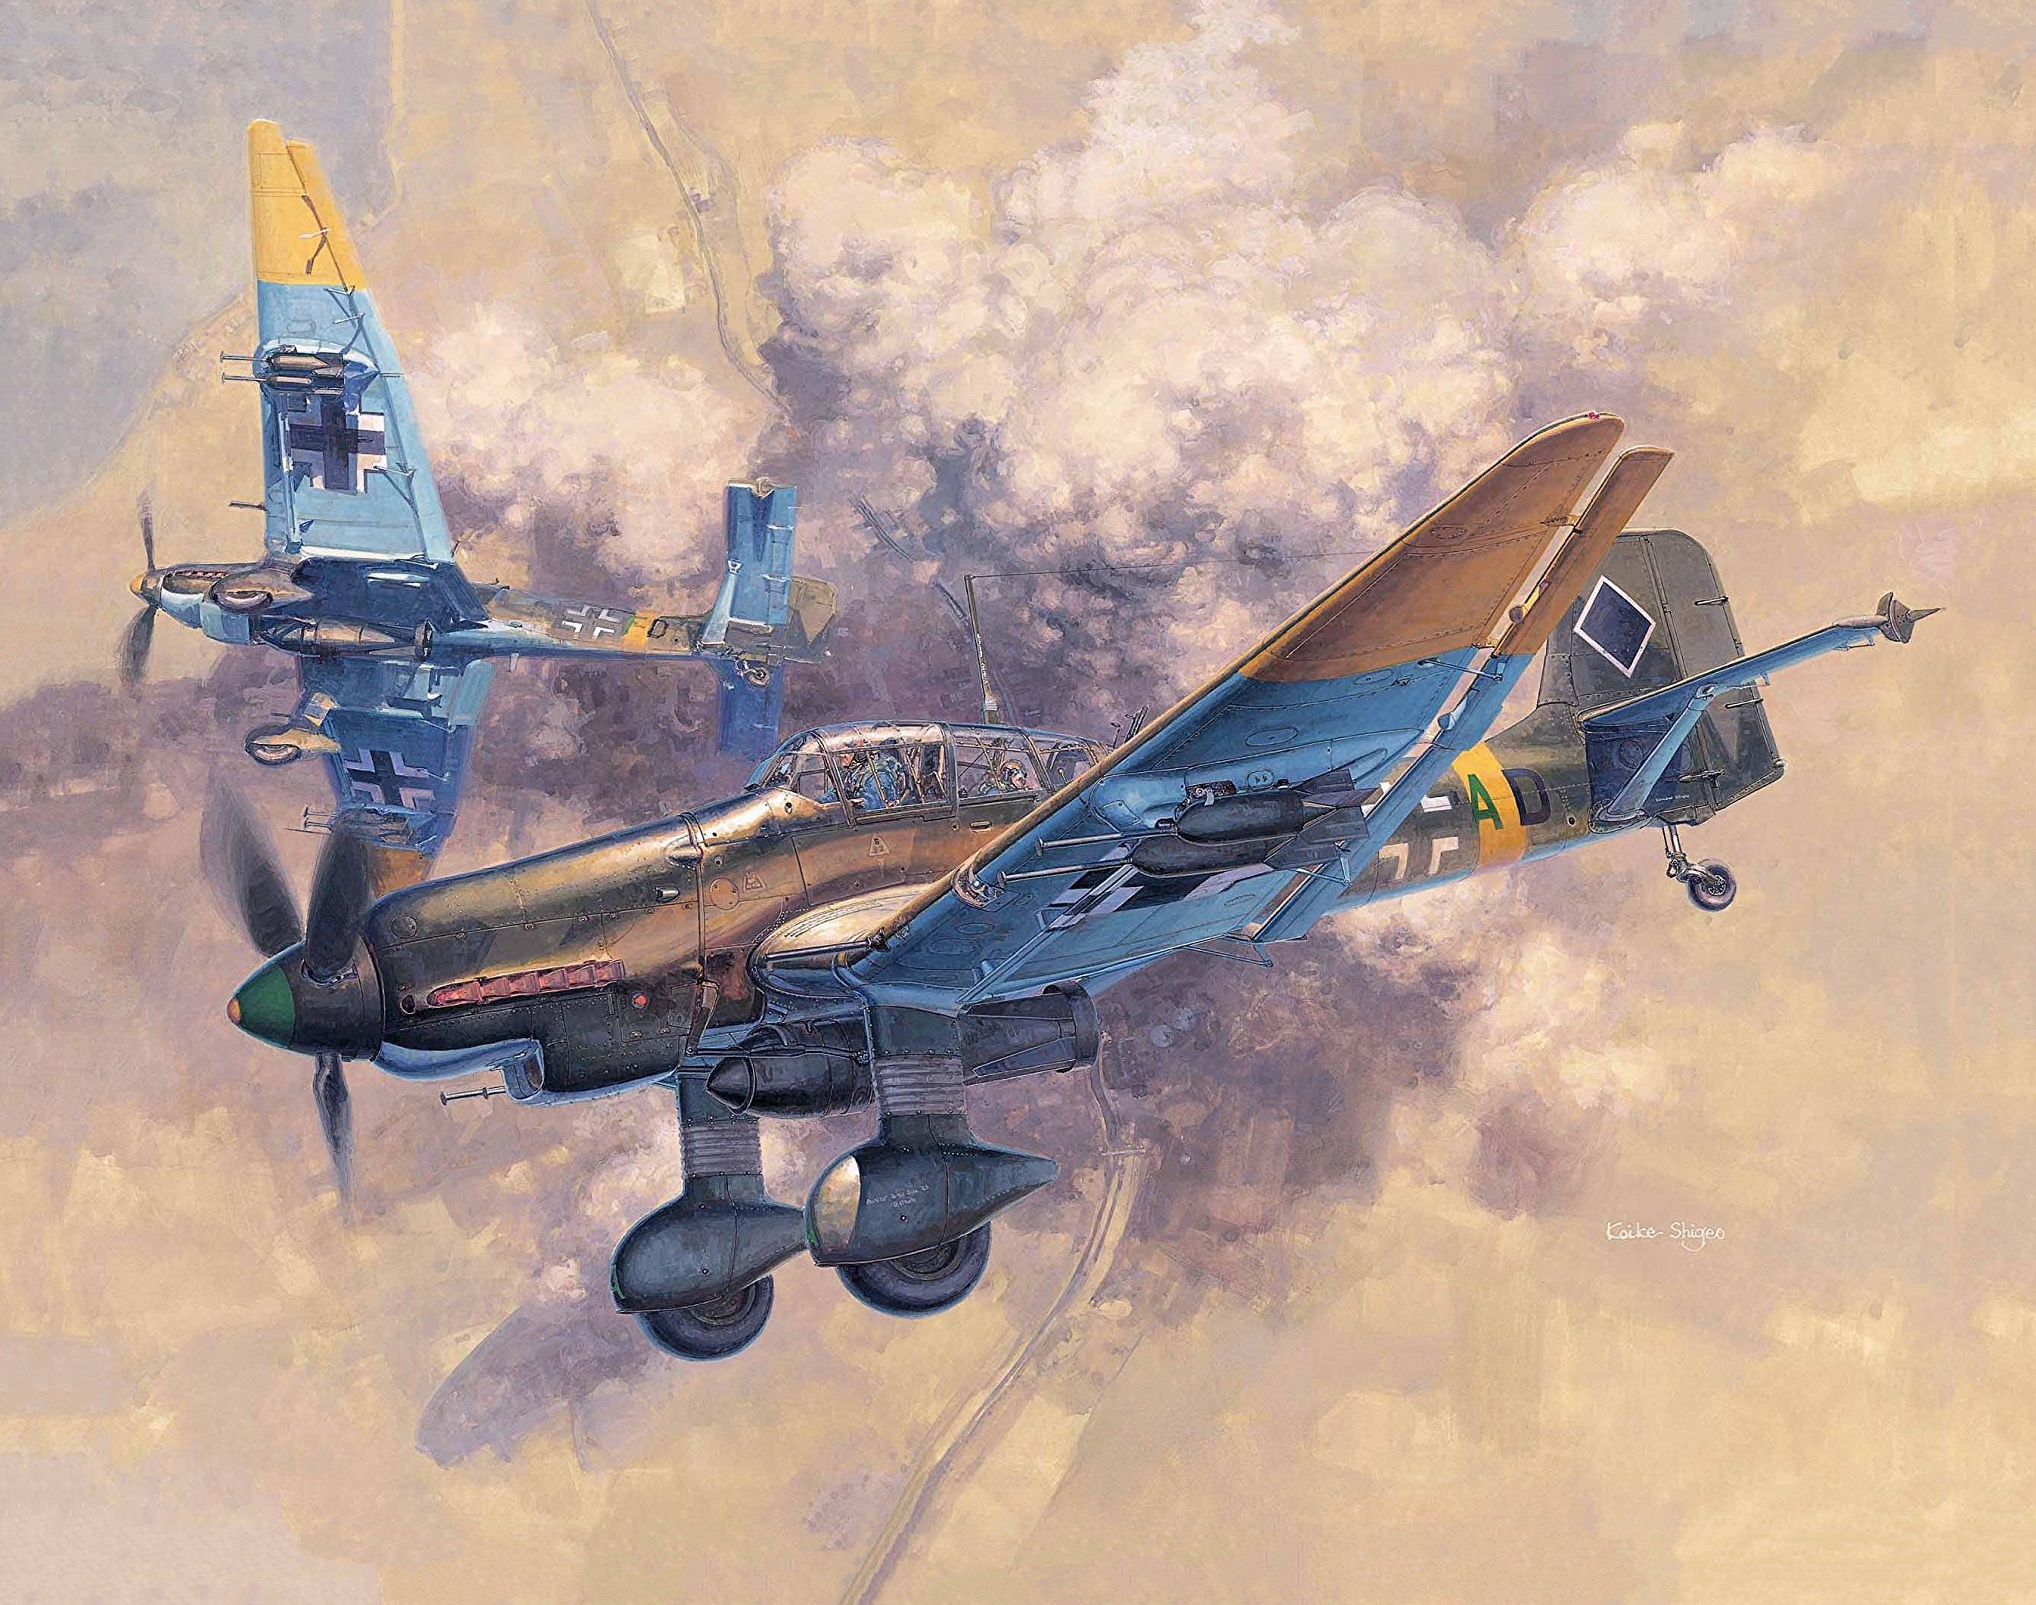 General 2036x1605 World War II military military aircraft aircraft airplane Luftwaffe Junkers Ju-87 Stuka Junkers Bomber Dive bomber Boxart painting German aircraft Germany